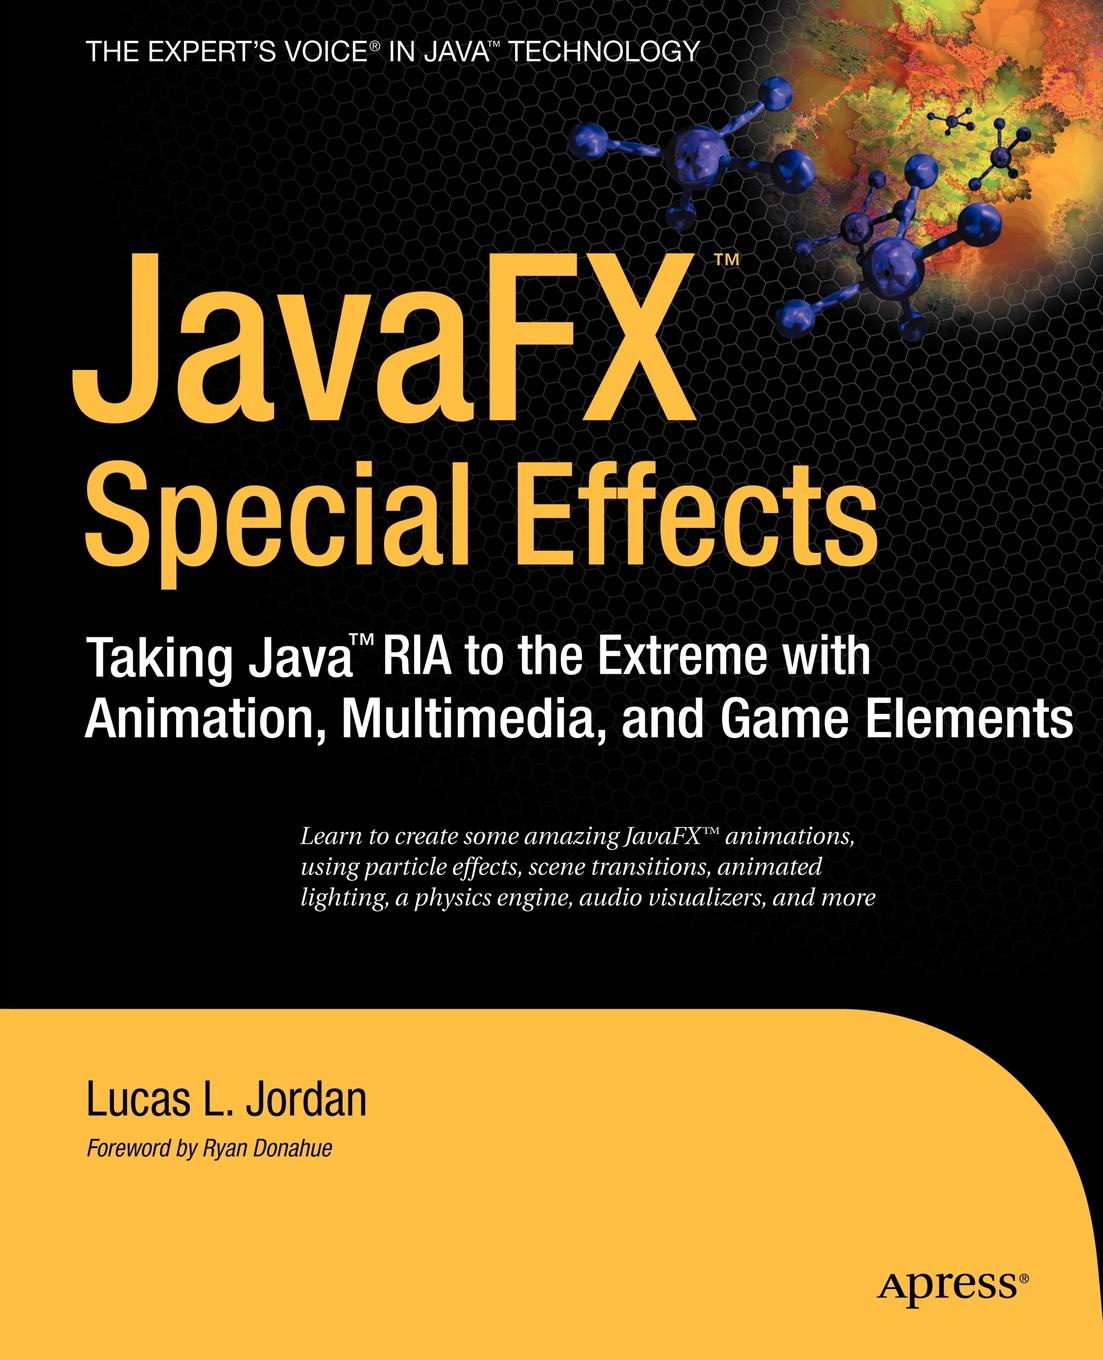 JavaFX Special Effects. Taking Java RIA to the Extreme with Animation, Multimedia, a ND Game Elements